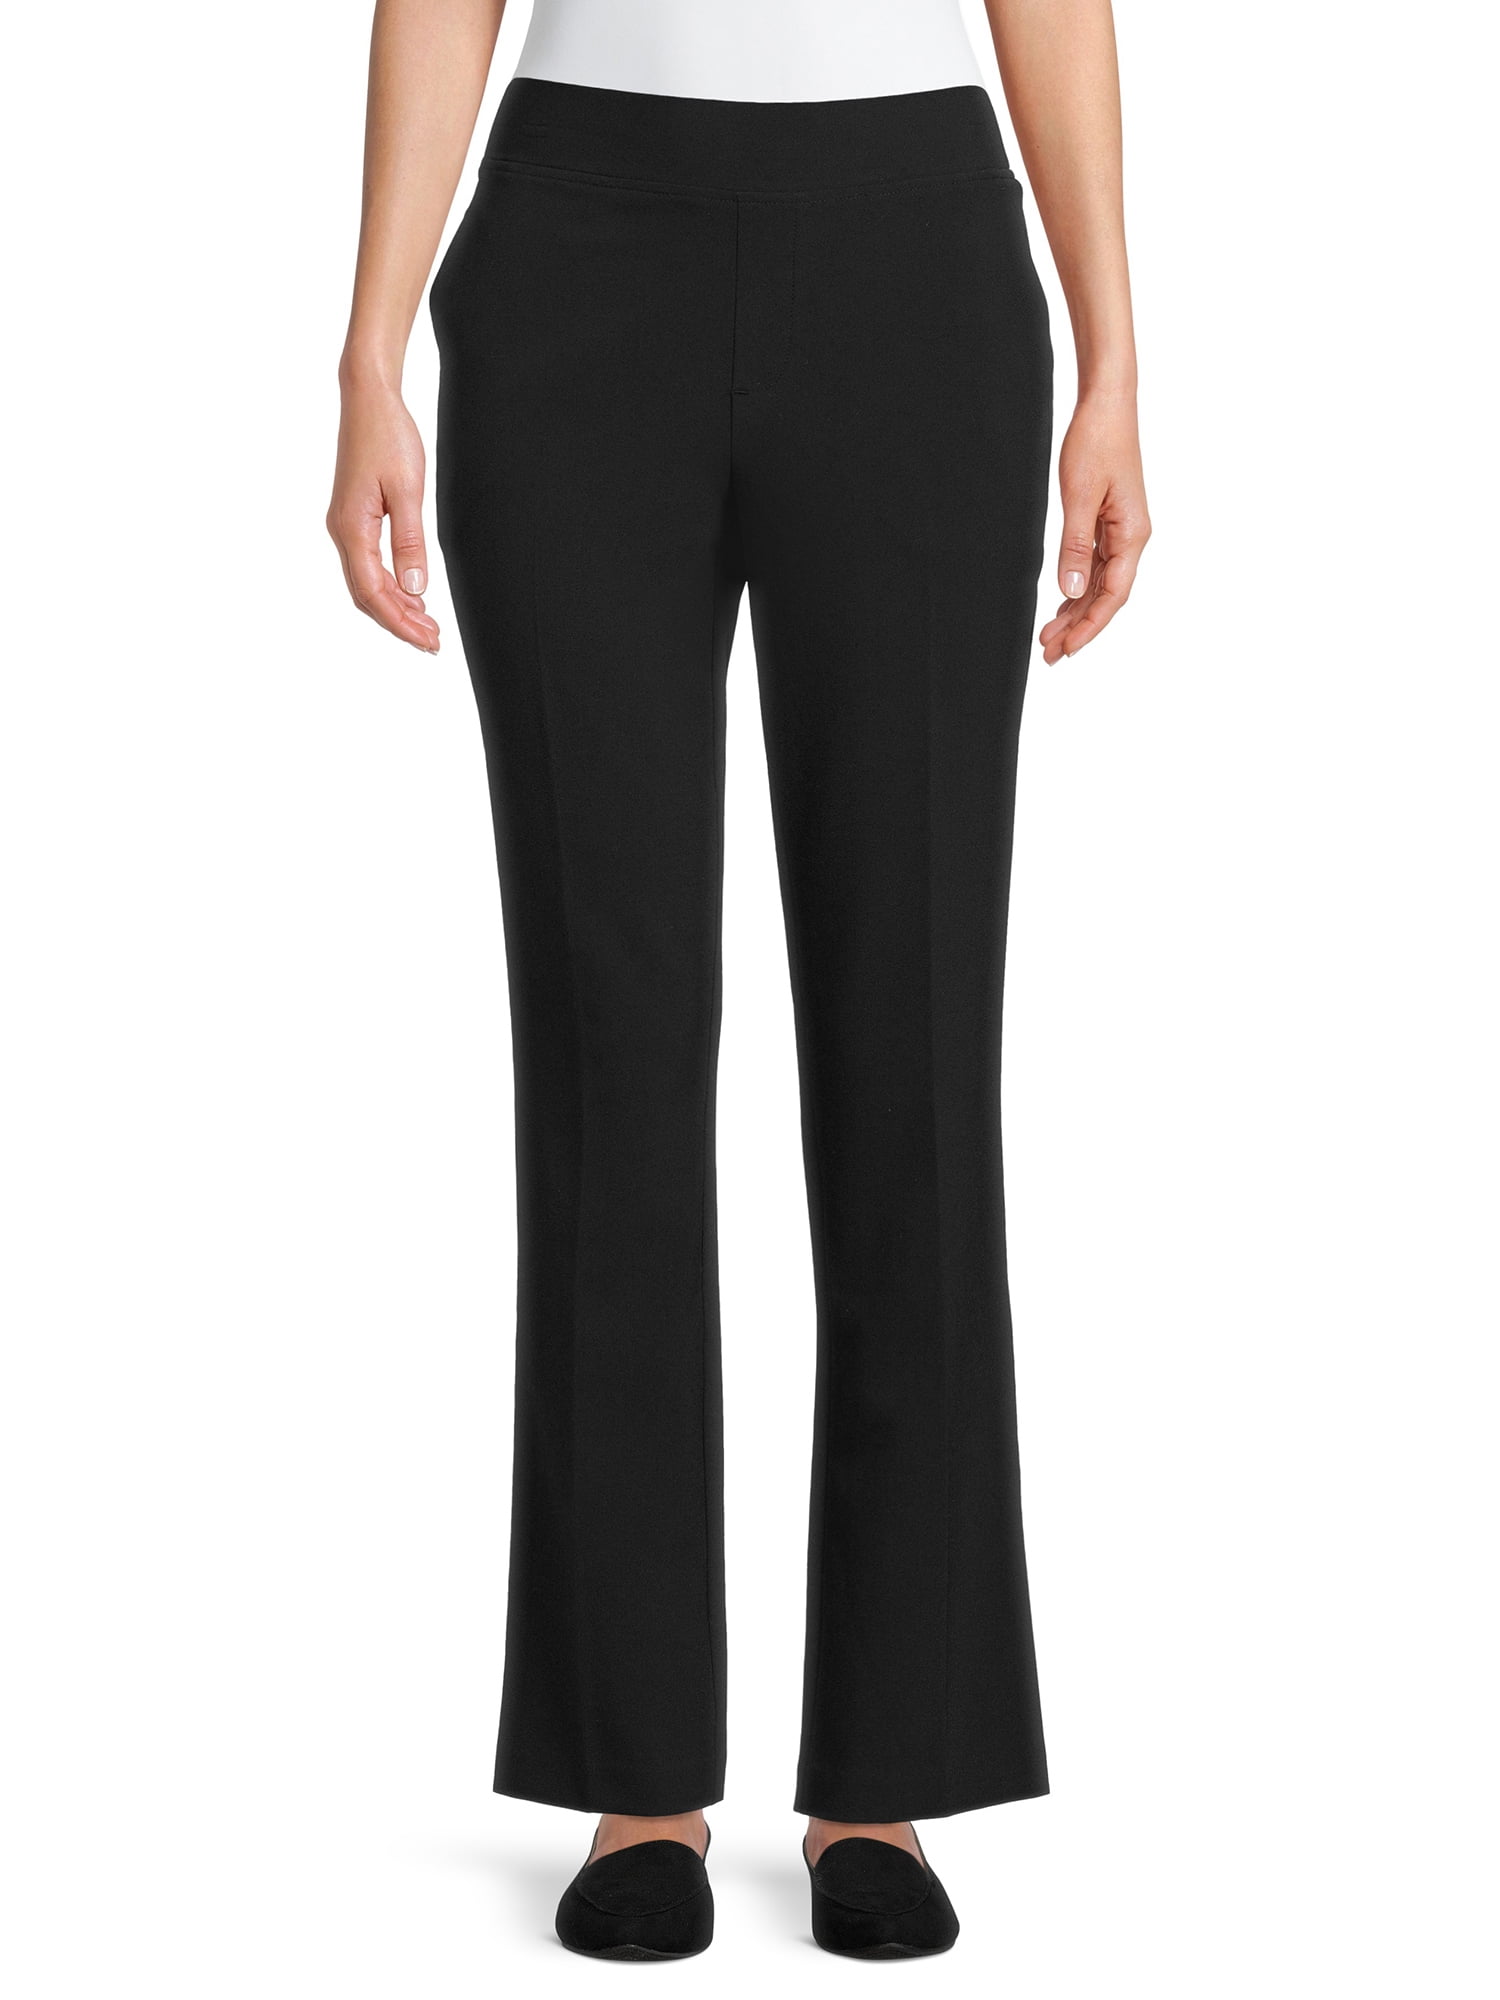 Africa Caution reign Time and Tru Women's Pull On Dress Pants - Walmart.com